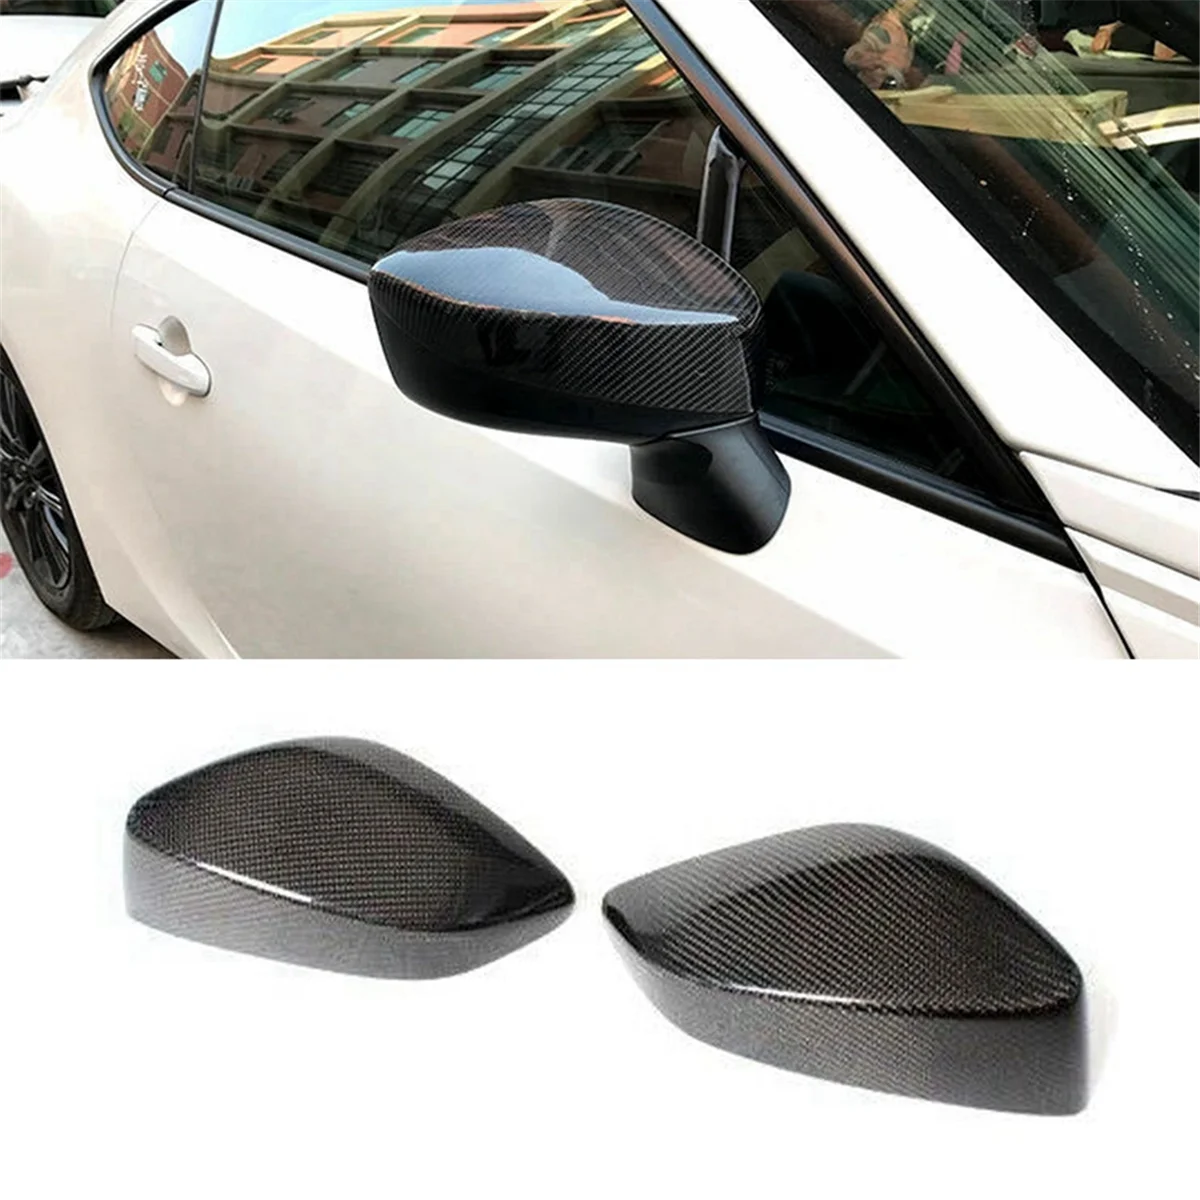 

For Toyota GT86 Subaru BRZ Scion FR-S2 2013-2020 Real Carbon Fiber Rearview Mirror Cover Add on